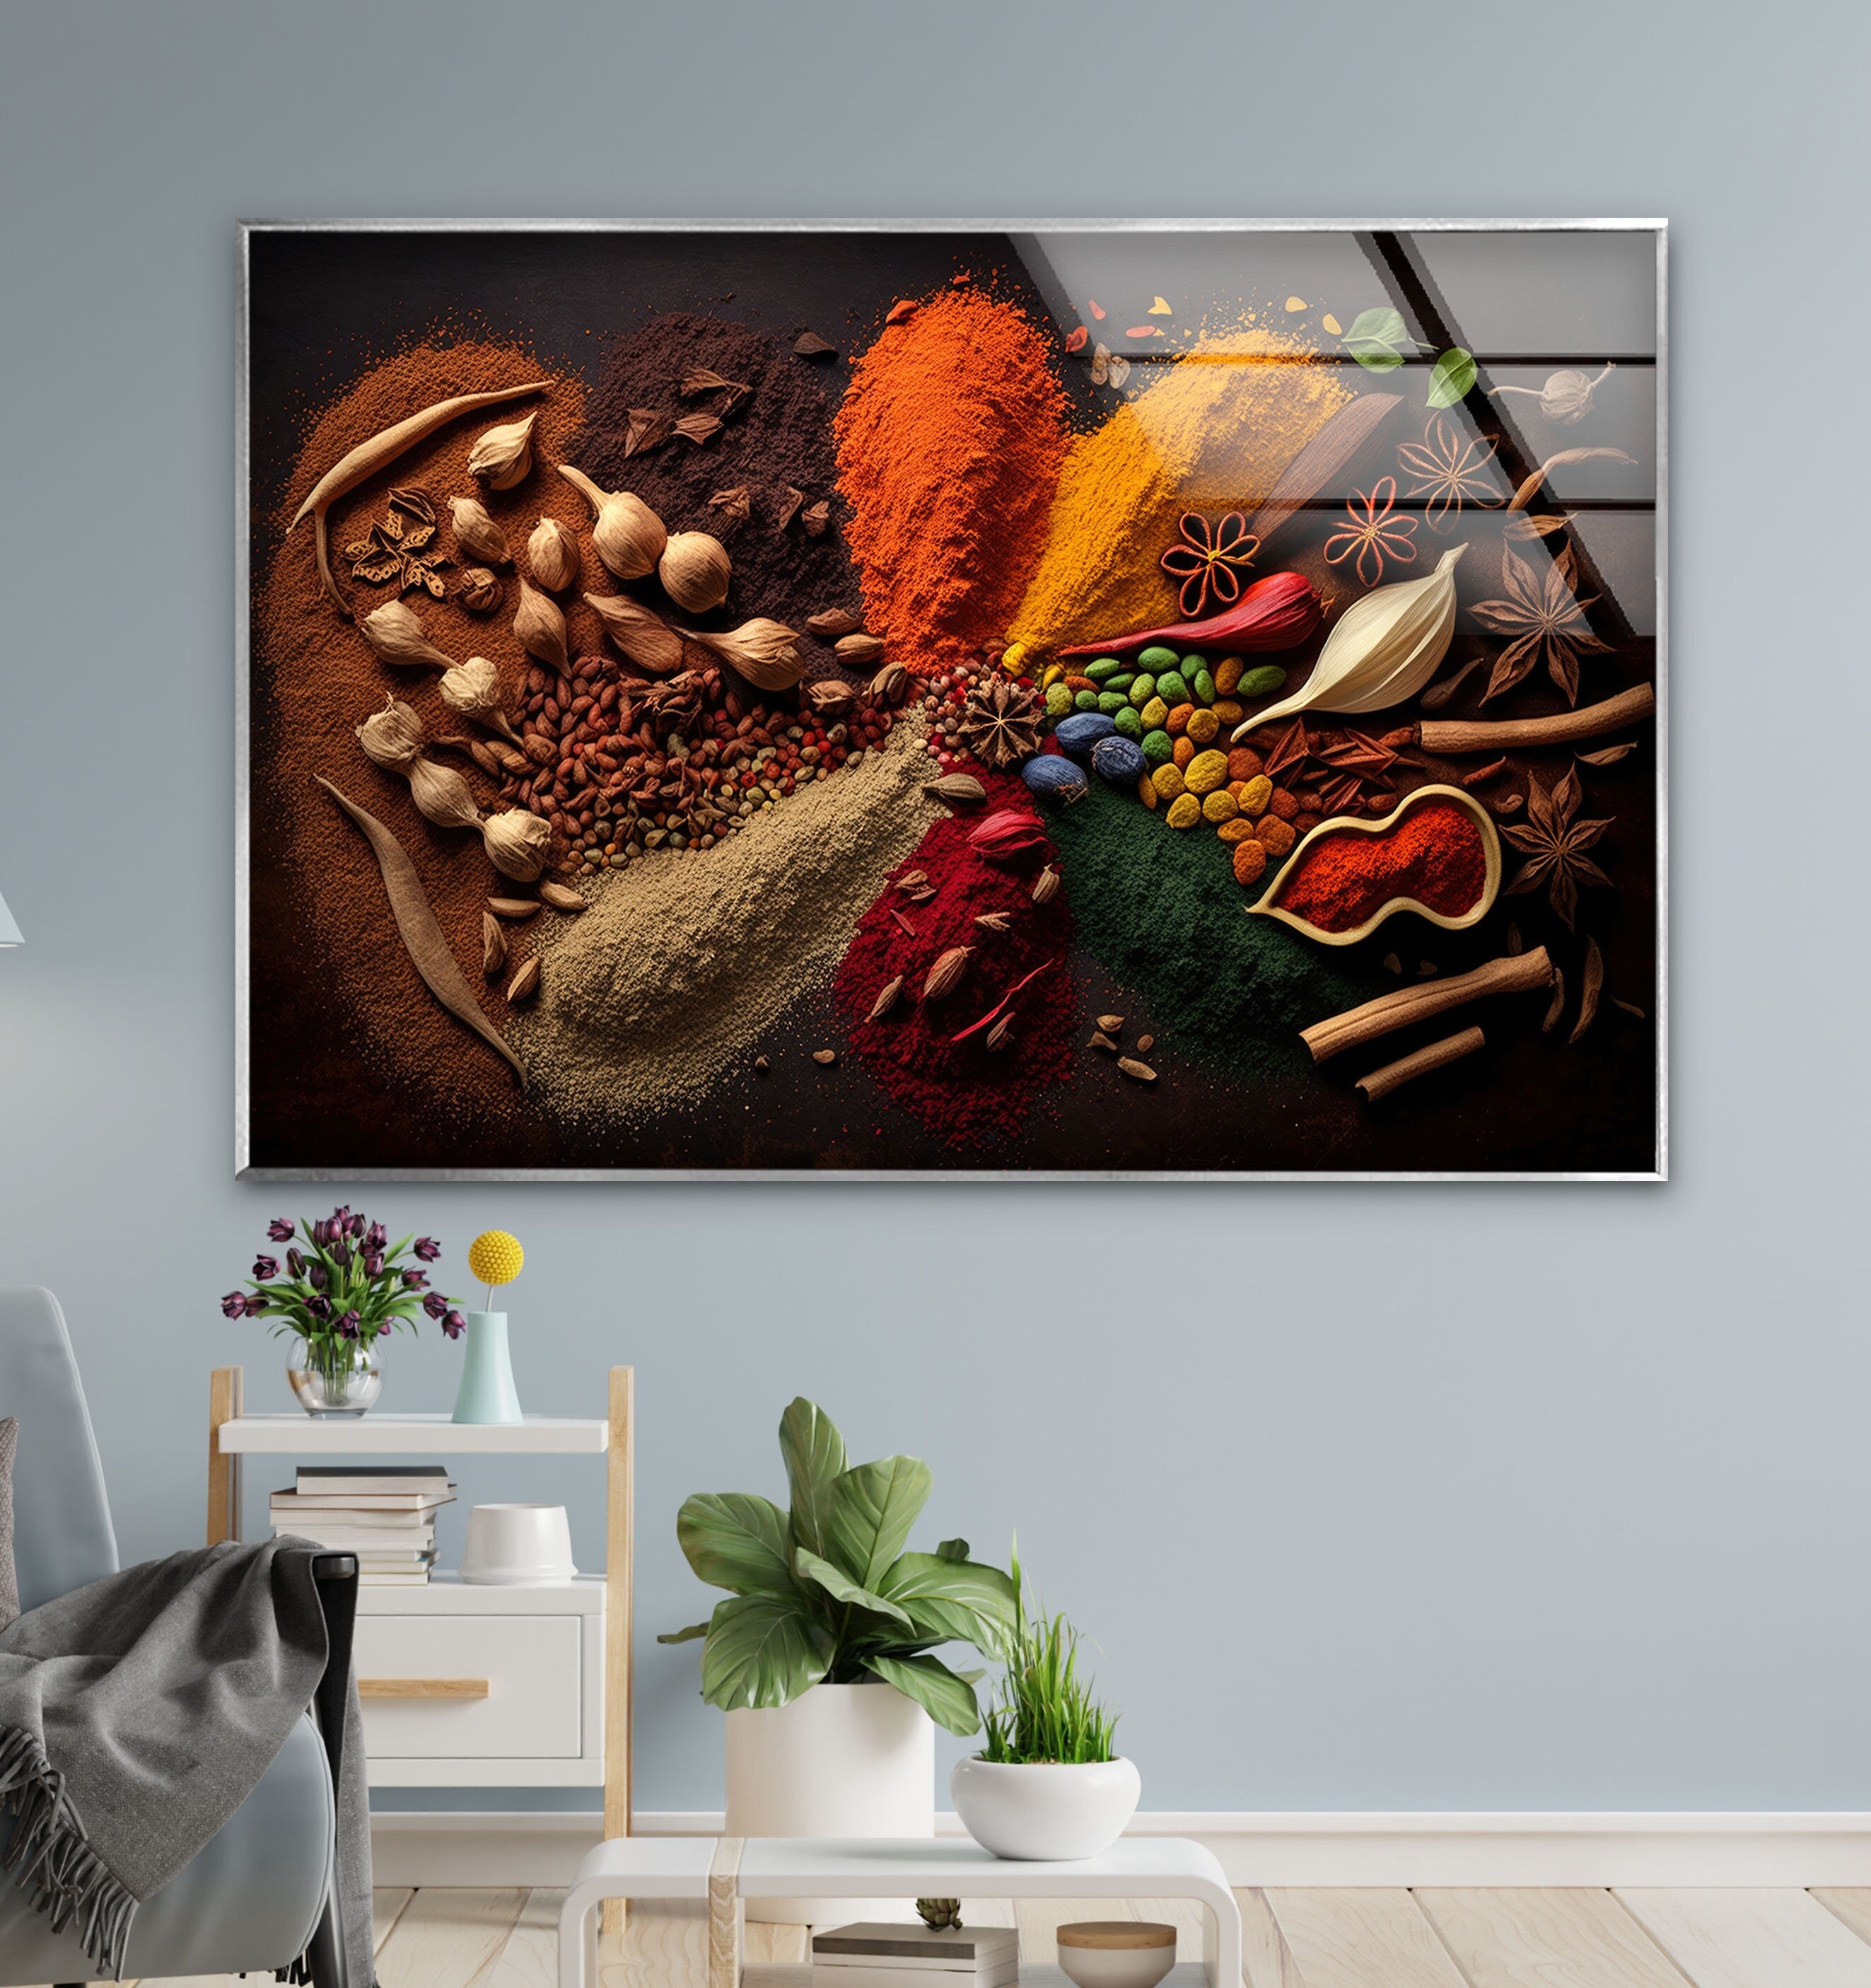 a picture of spices on a wall above a chair